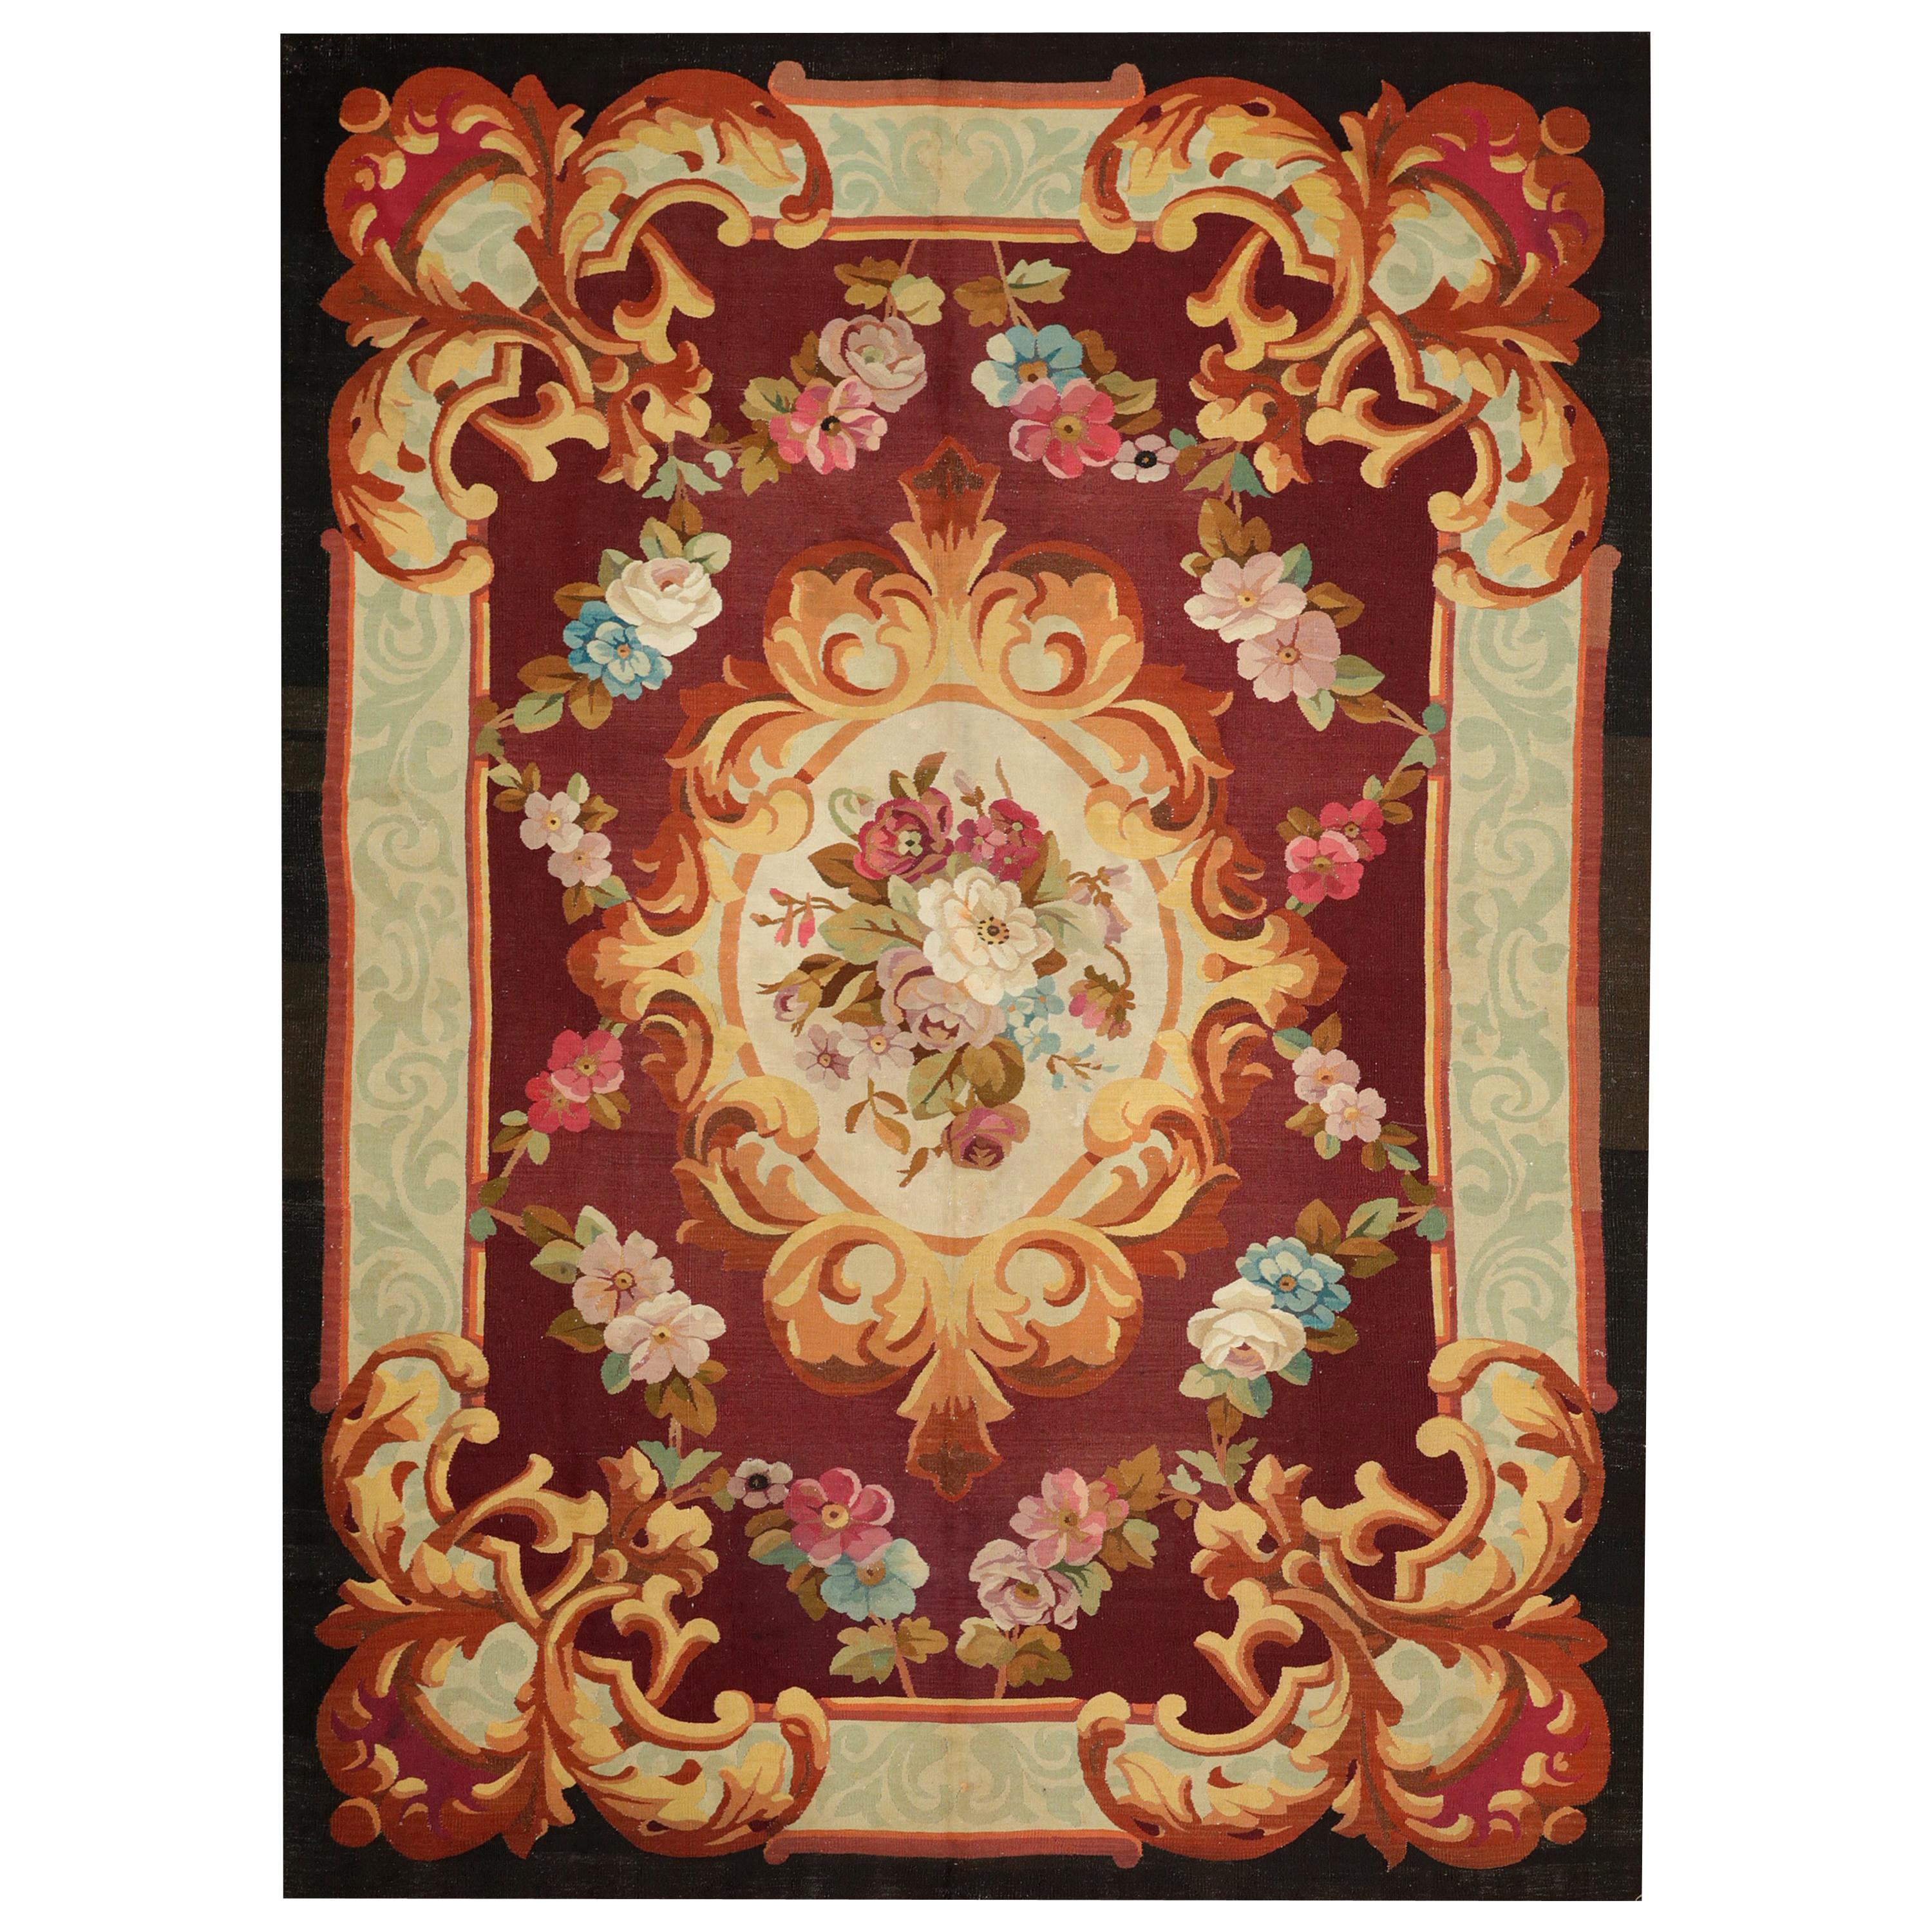 Mid-19th Century Handwoven Antique Aubusson Rug, Red with Flowers